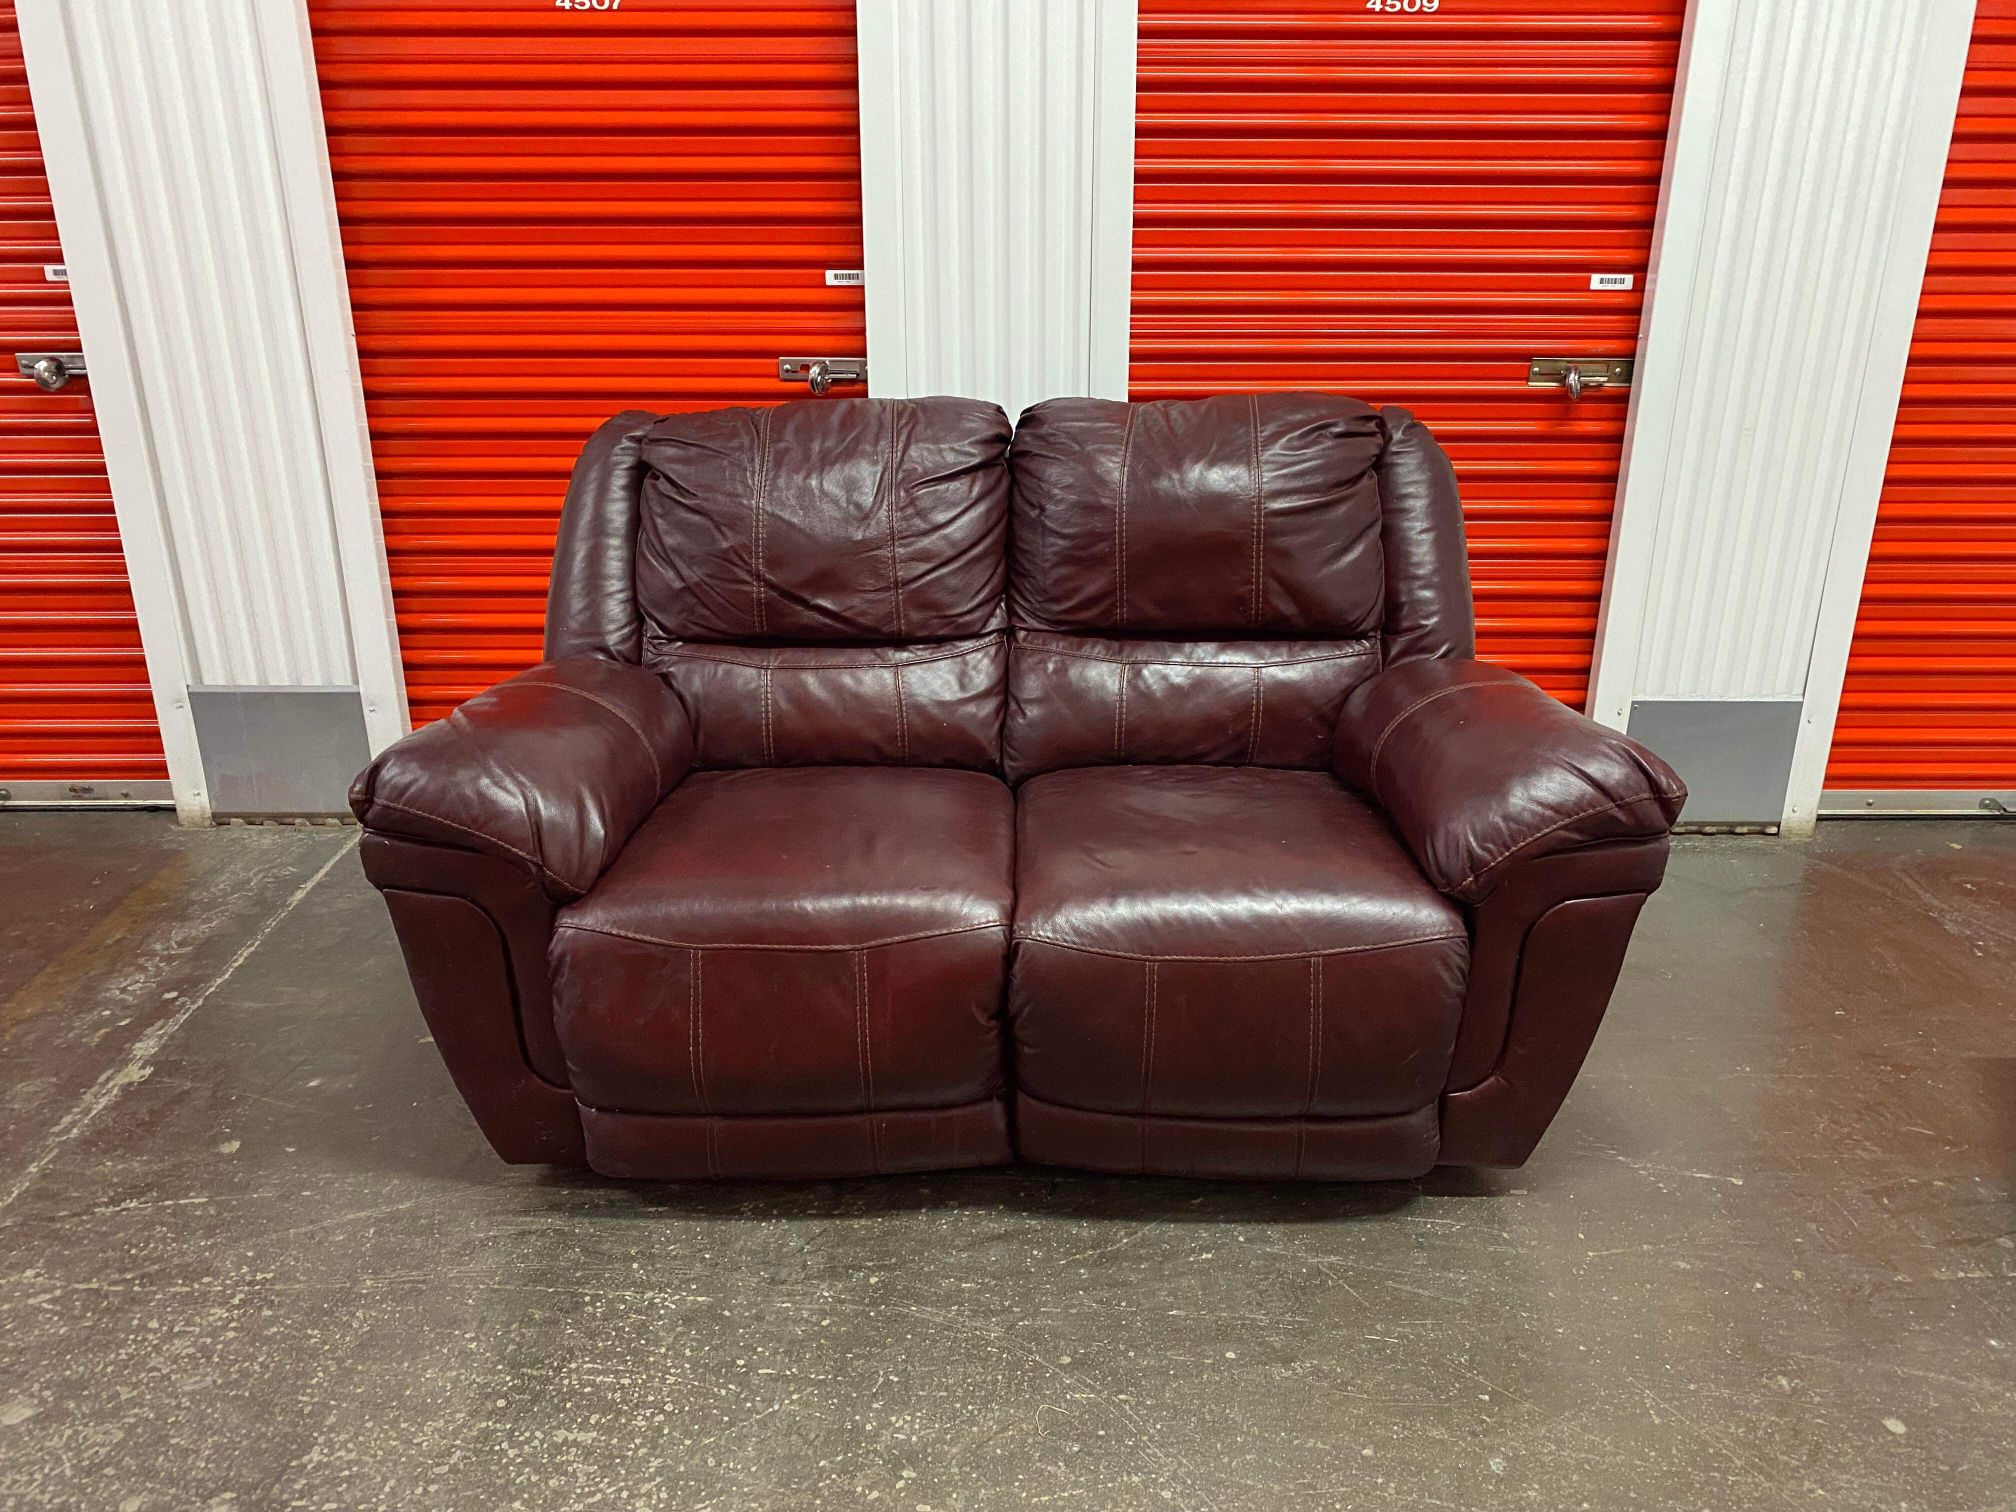 Loveseat Recliner - Free Delivery 